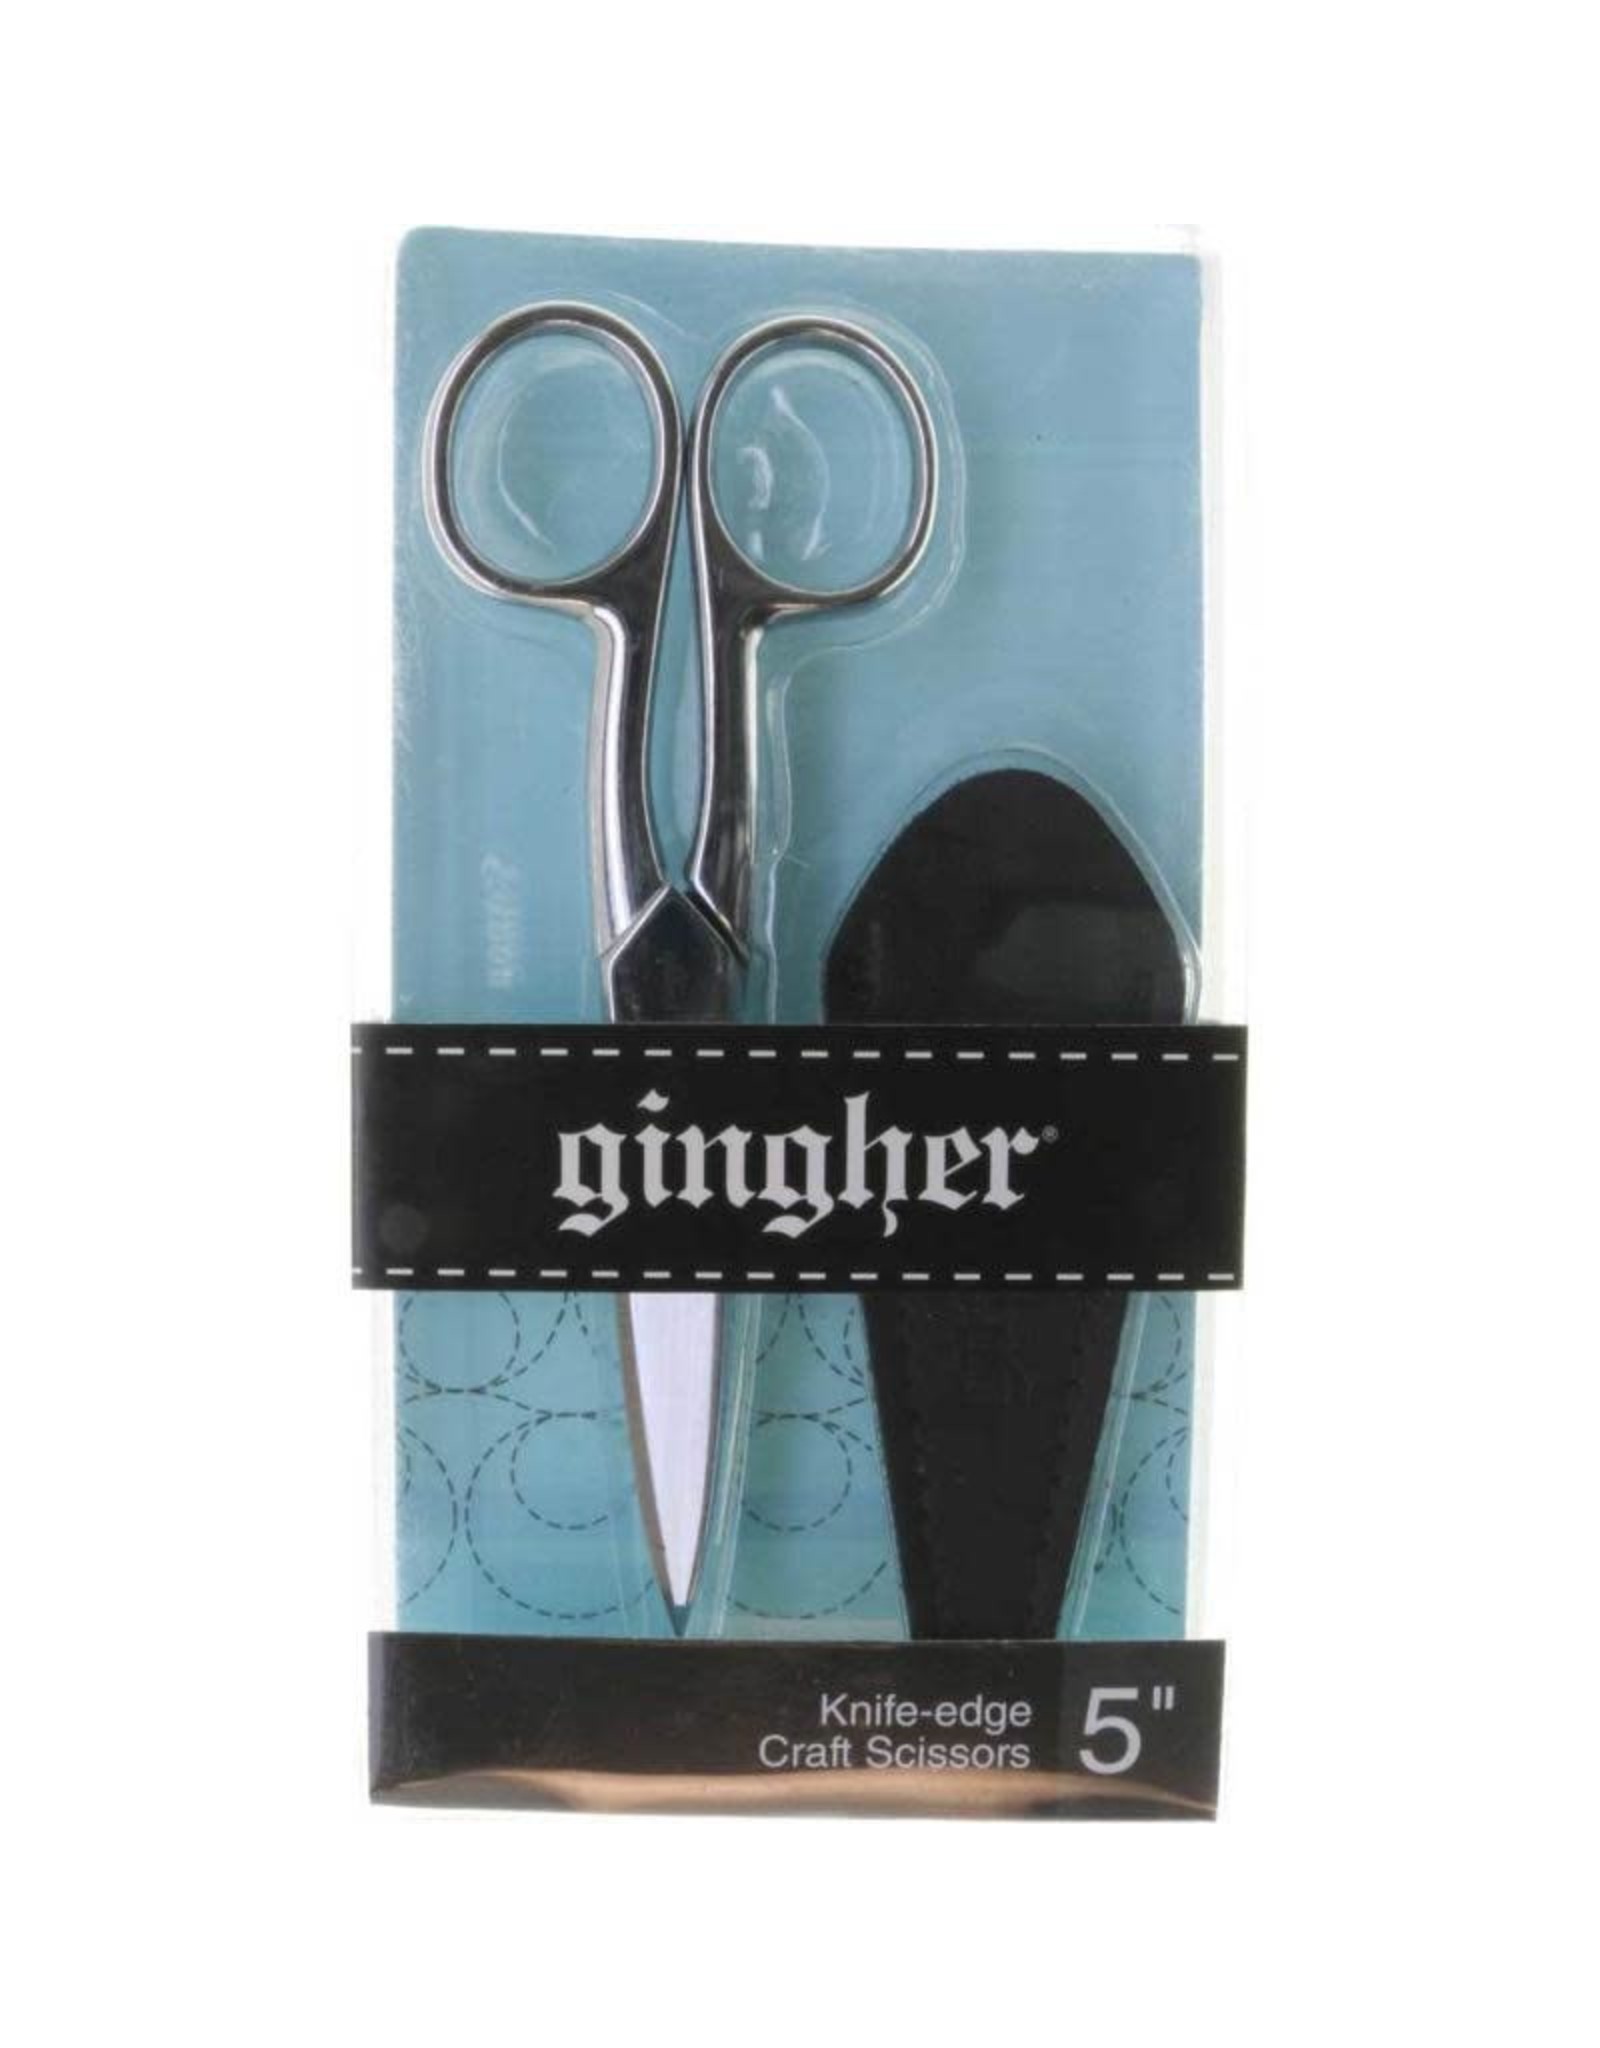 Gingher 5 Knife-edge Craft Scissors - Picking Daisies